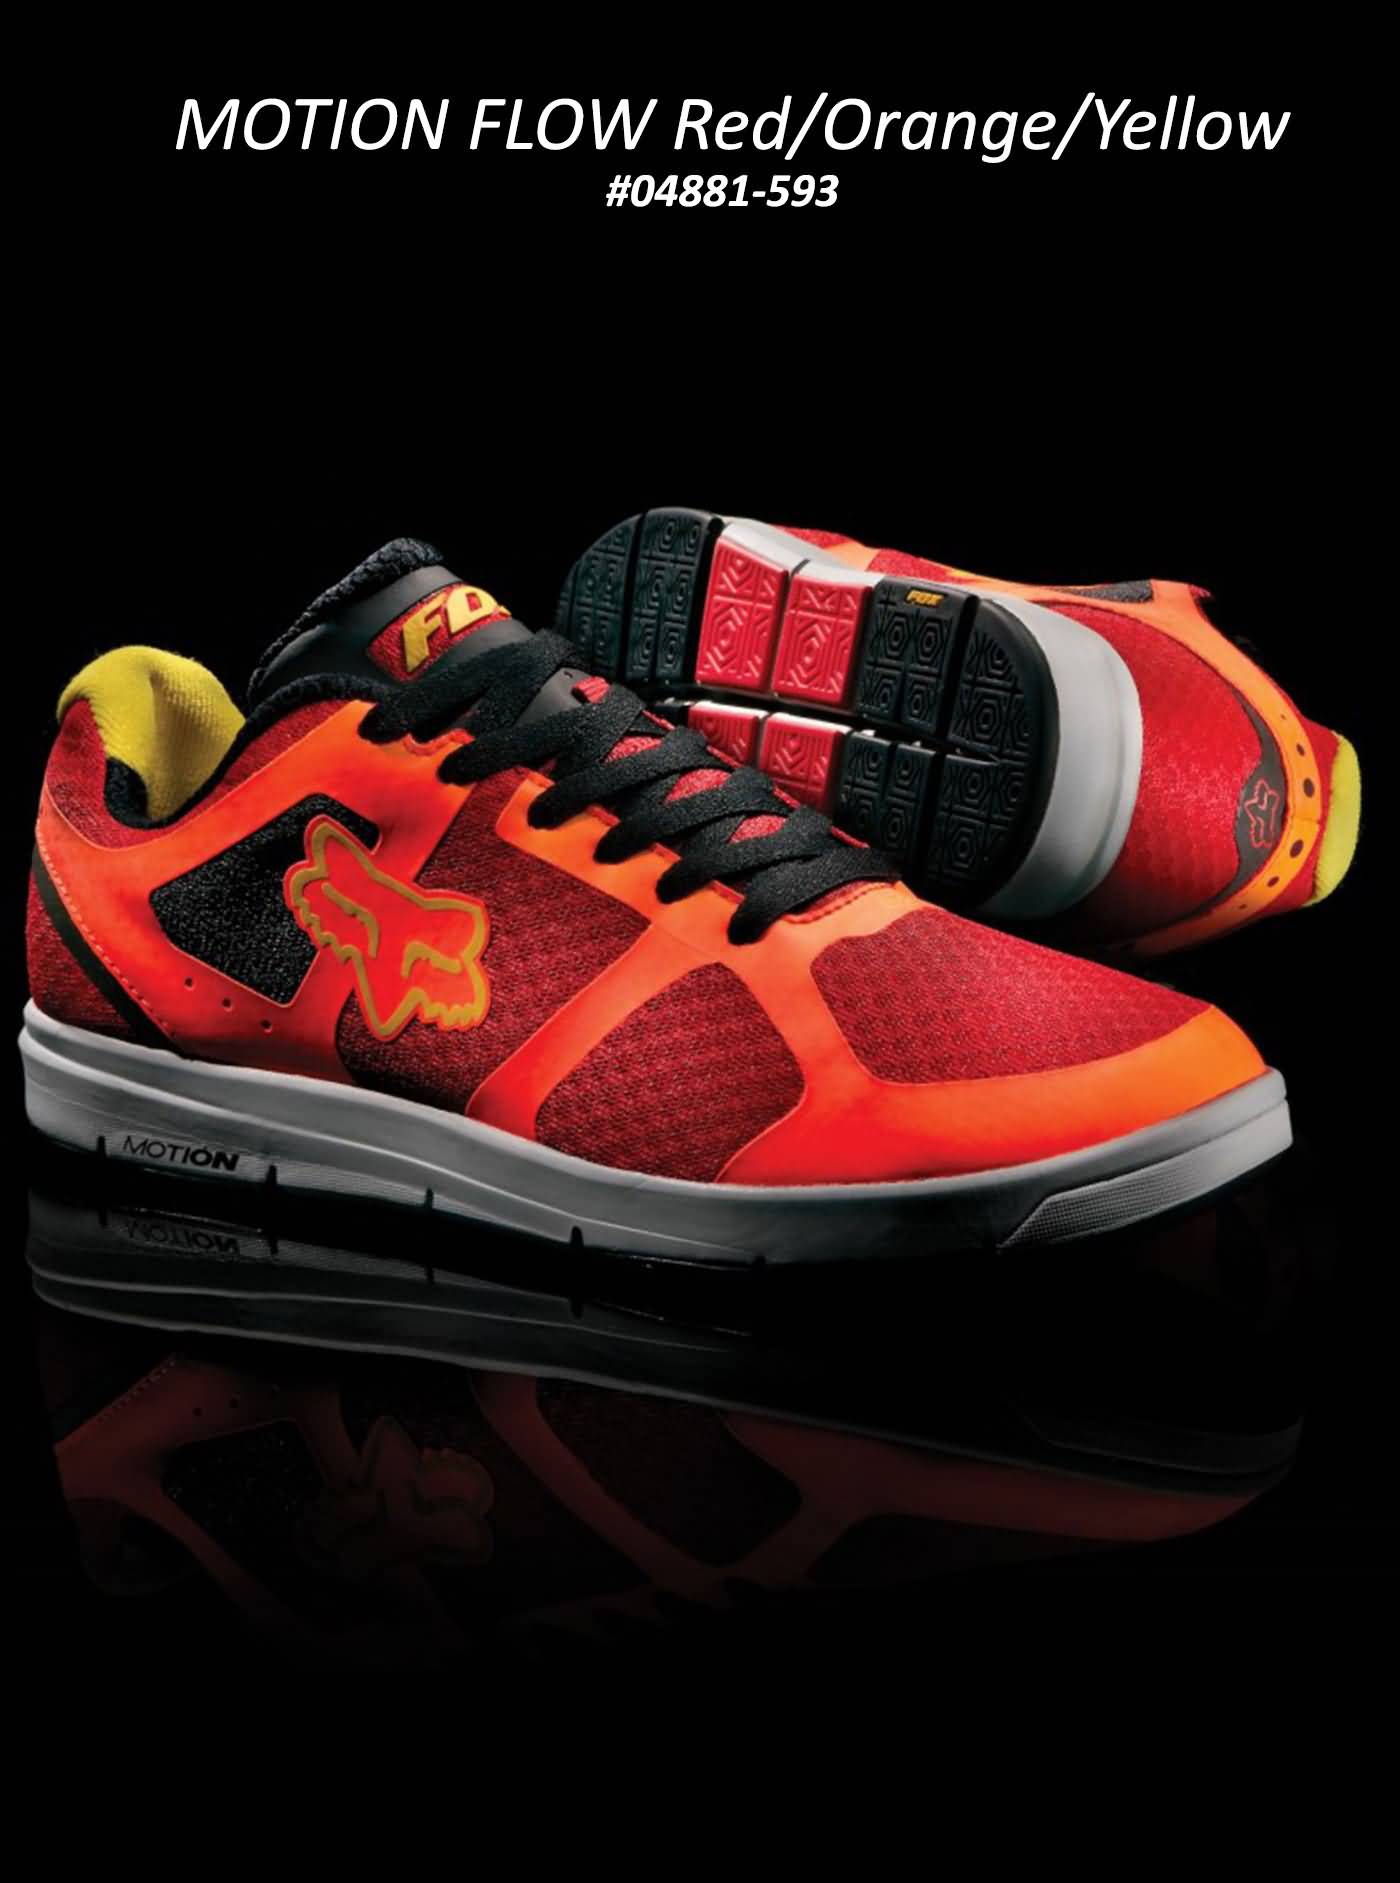 Fox Racing Fall 2013 Mens Shoes Lifestyle Athletic Footwear Collection